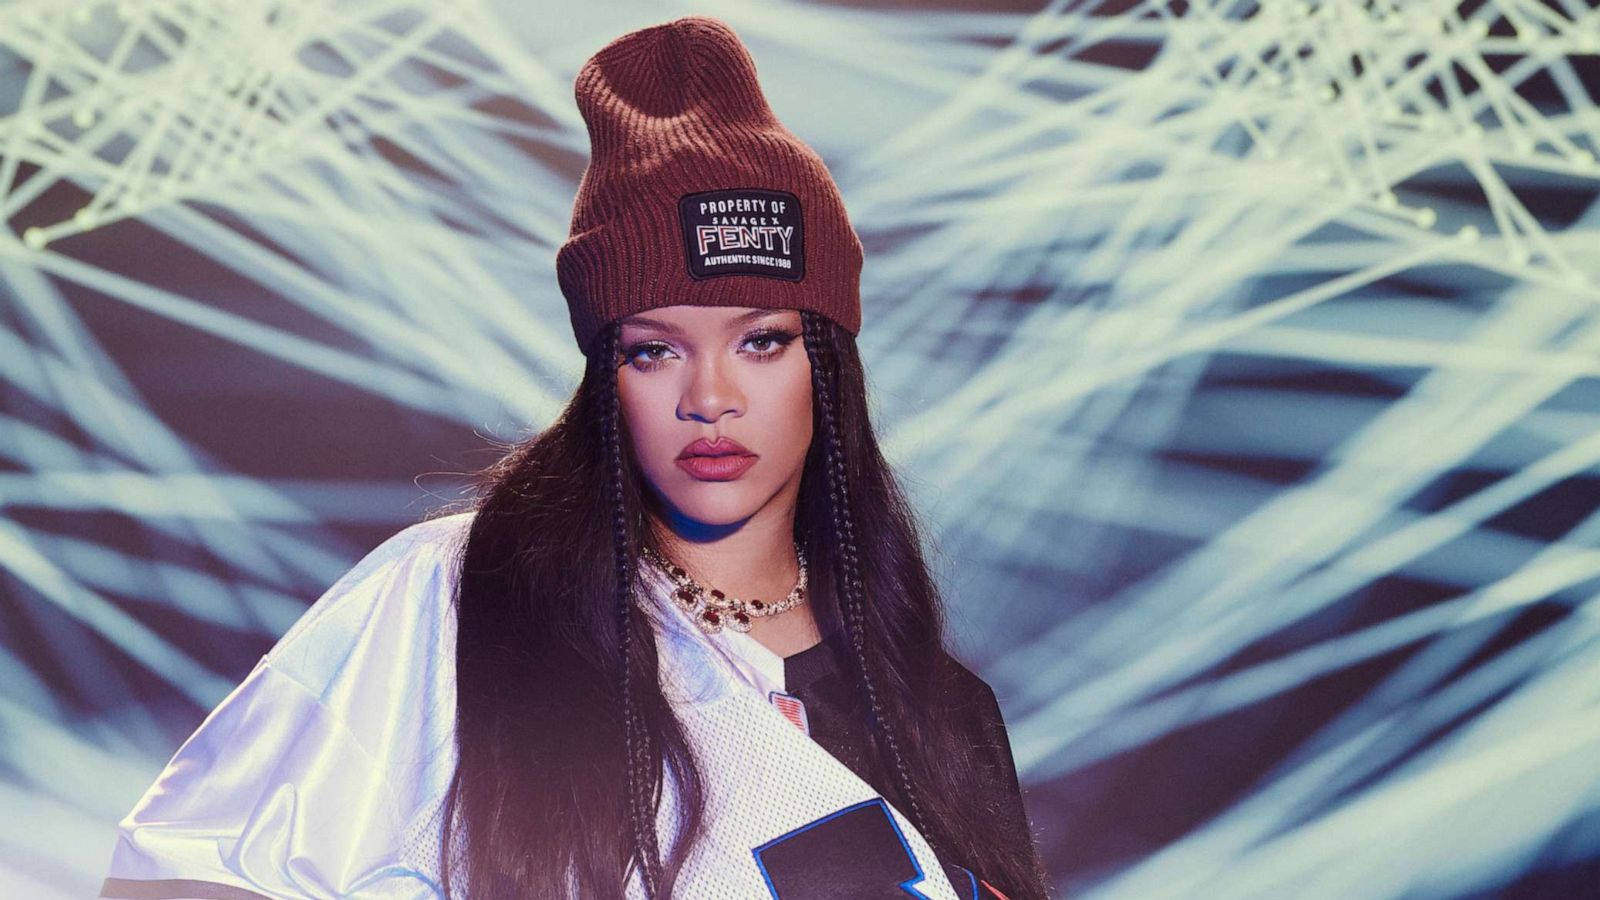 Rihanna shares look at Fenty sweater inspired by upcoming Super Bowl  Halftime Show performance